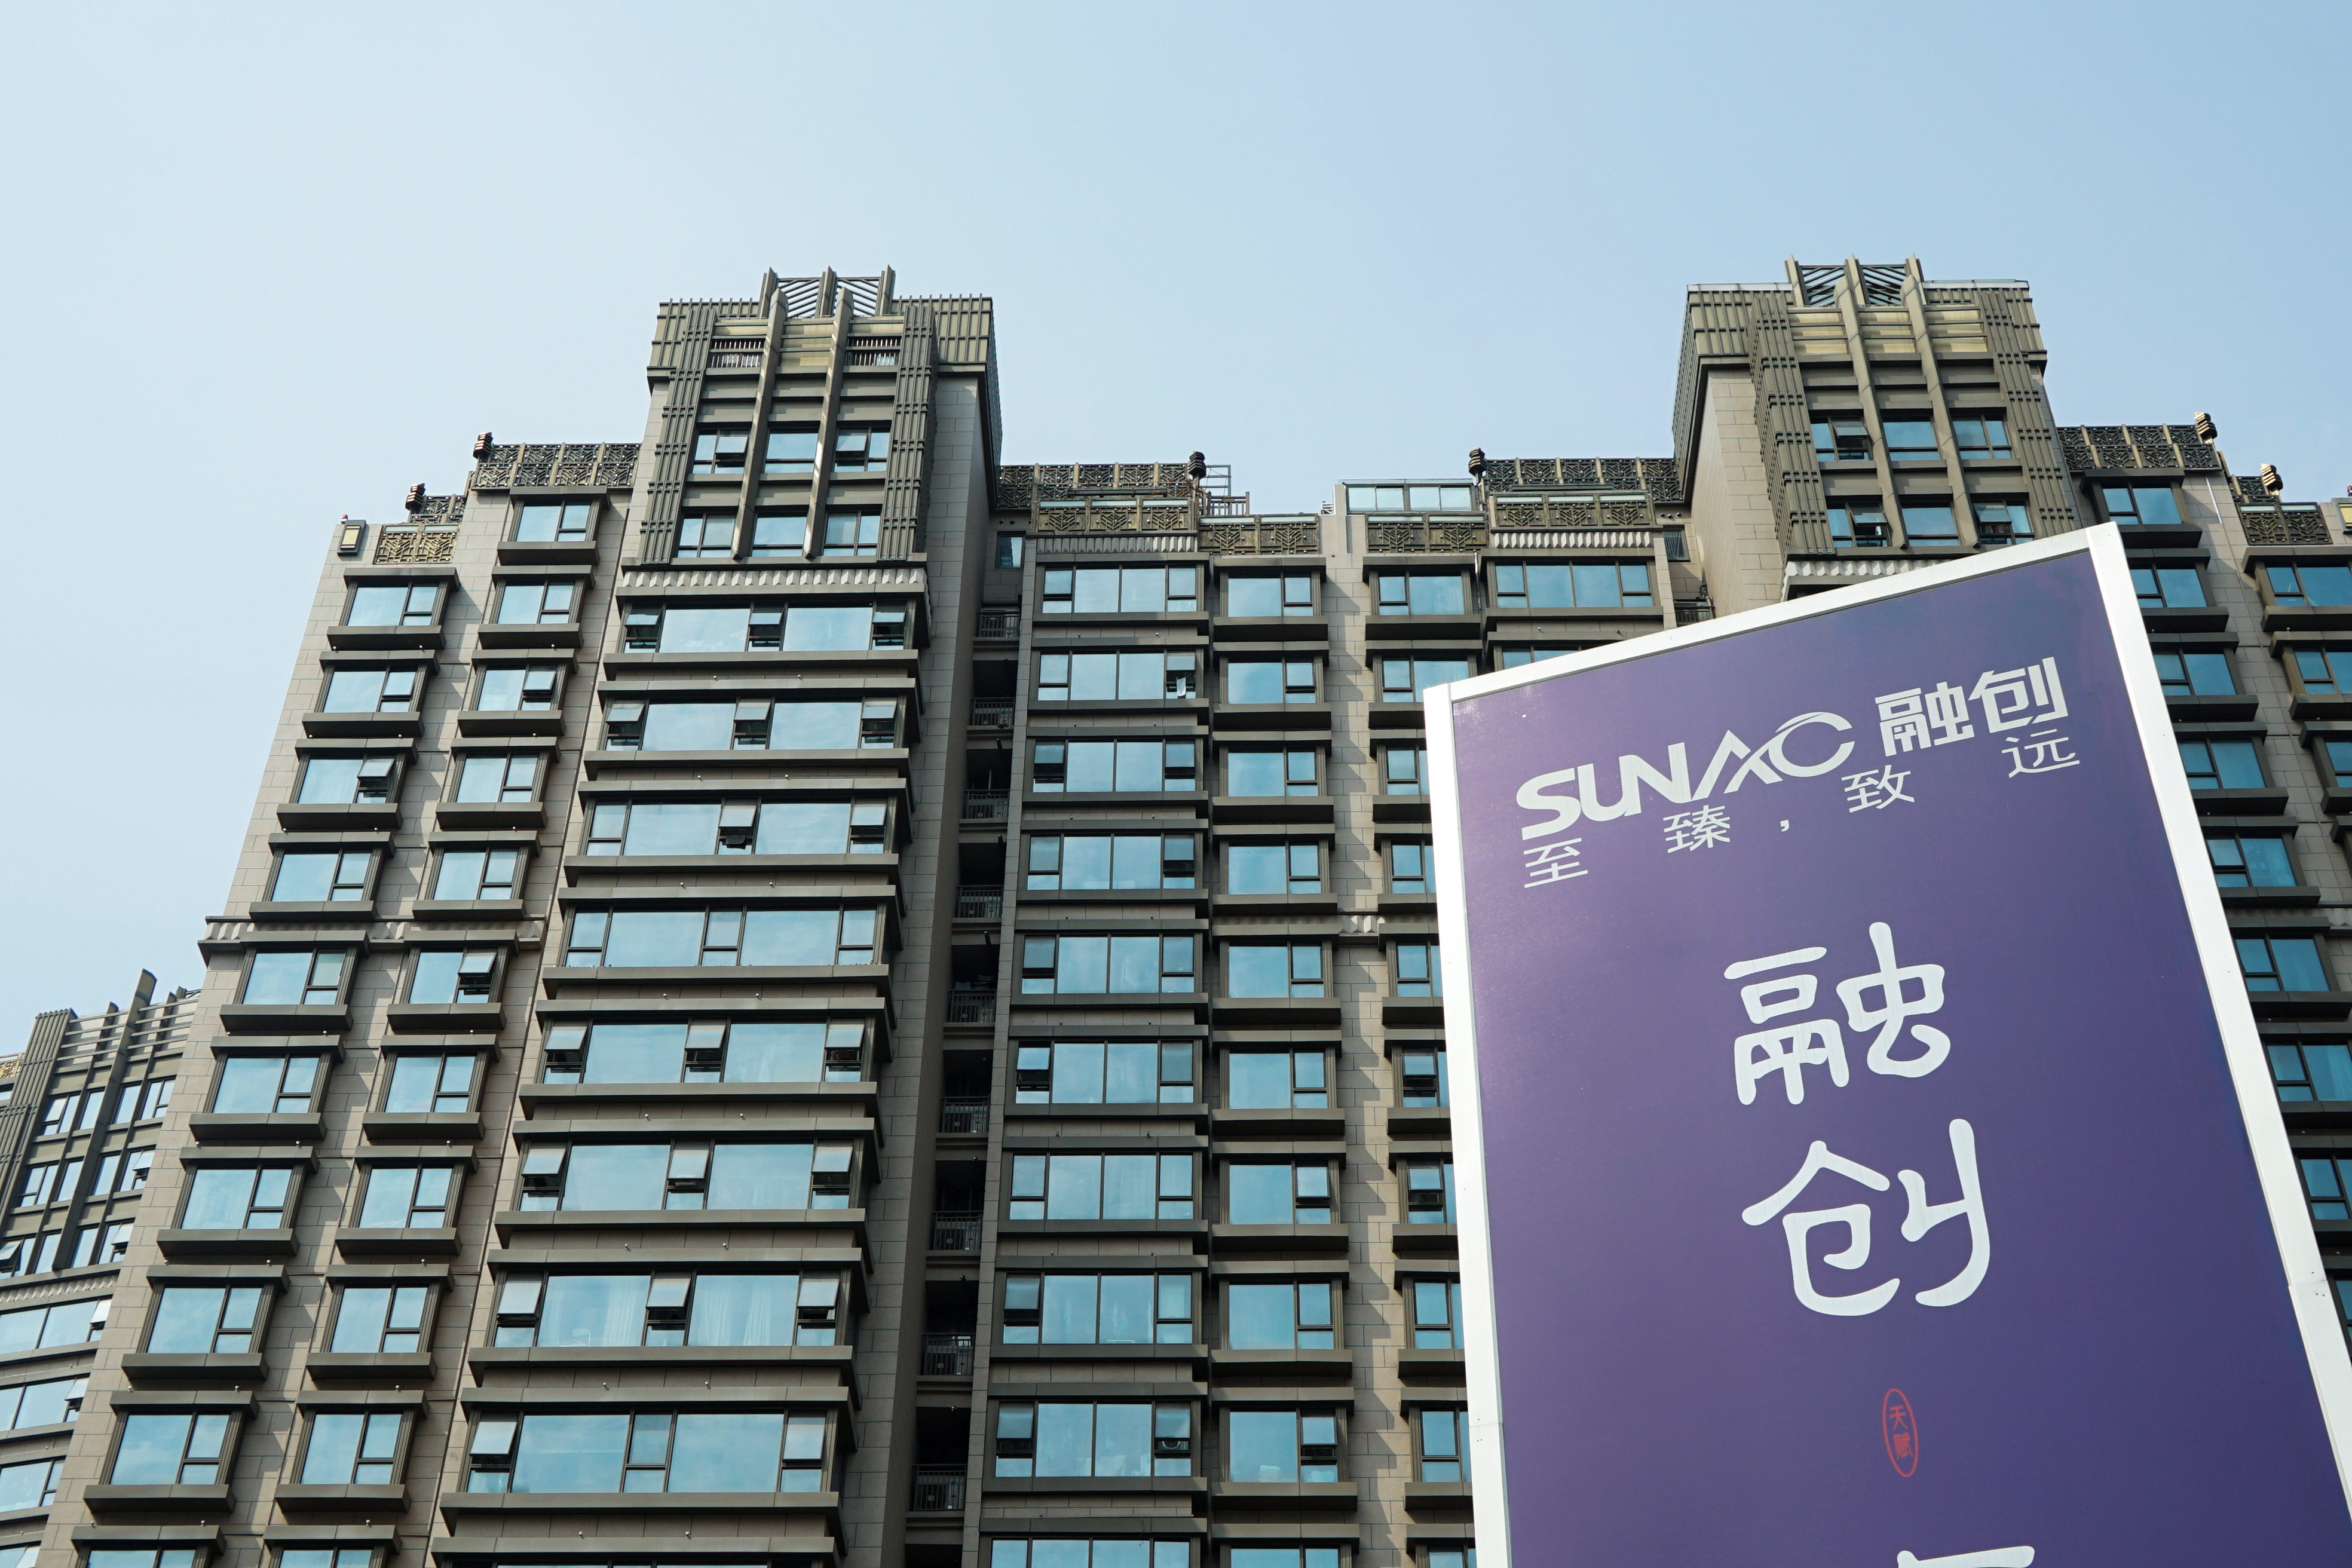 Advertisement of Sunac China Holdings is seen at a residential complex in Shanghai